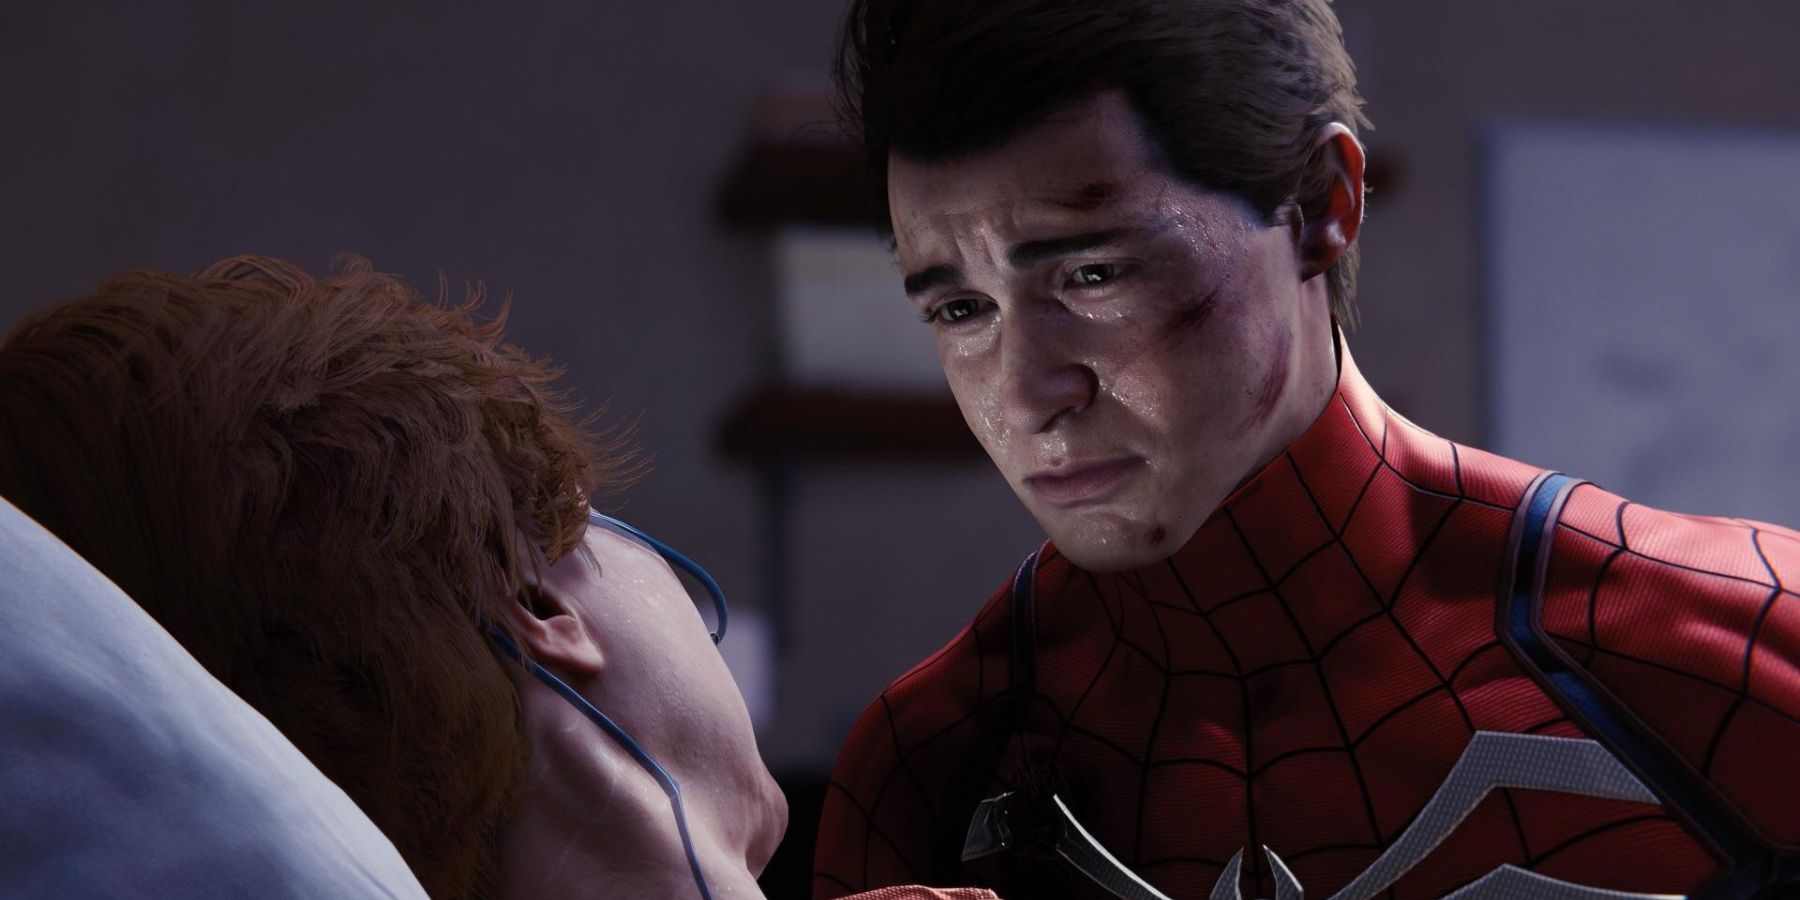 Spider-Man 2': Yuri Lowenthal Has Actually Voiced Peter Parker for Years –  The Hollywood Reporter